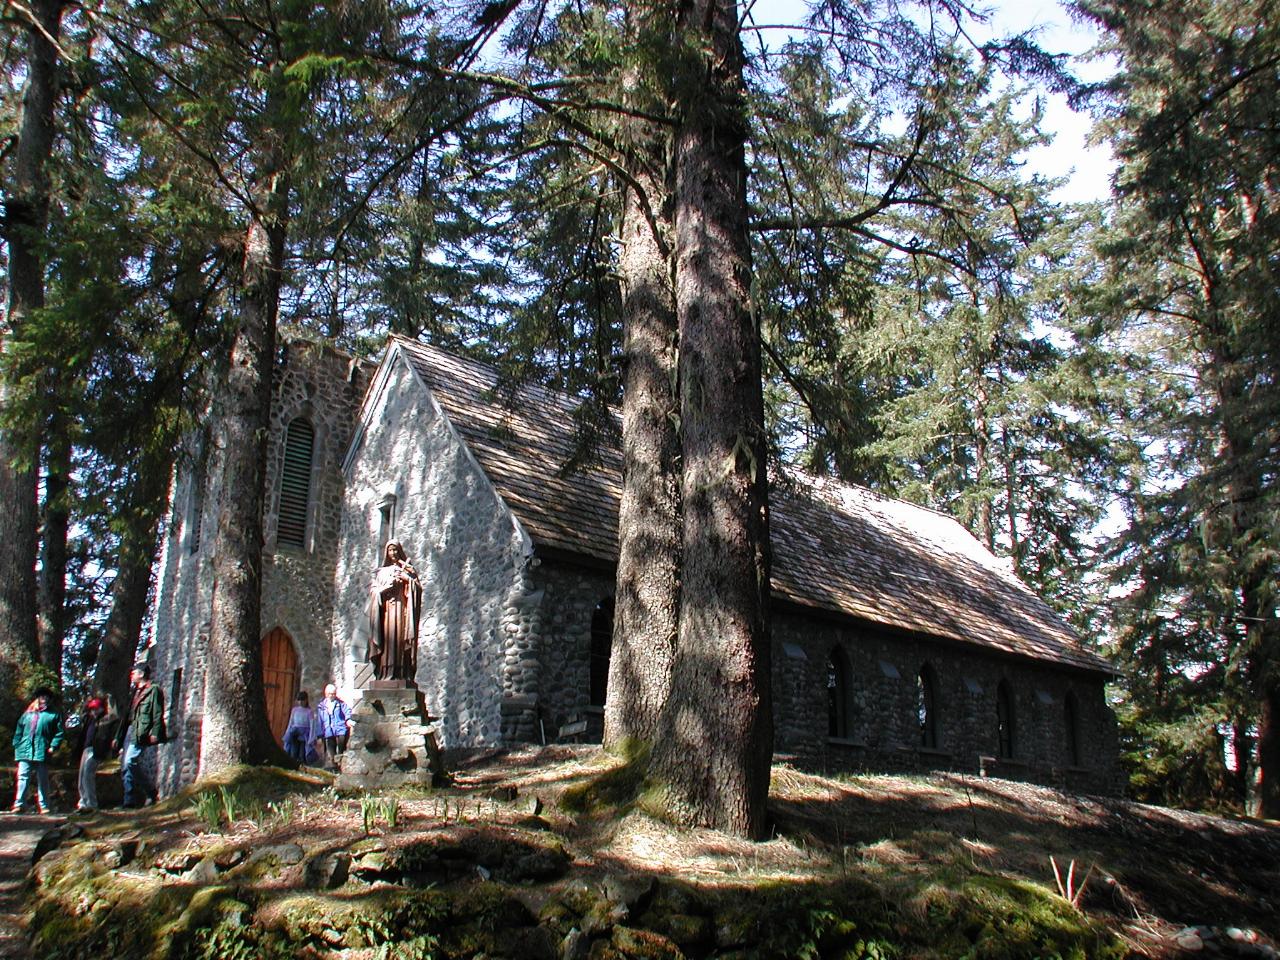 Shrine of St. Terese (Catholic), a little north of Juneau